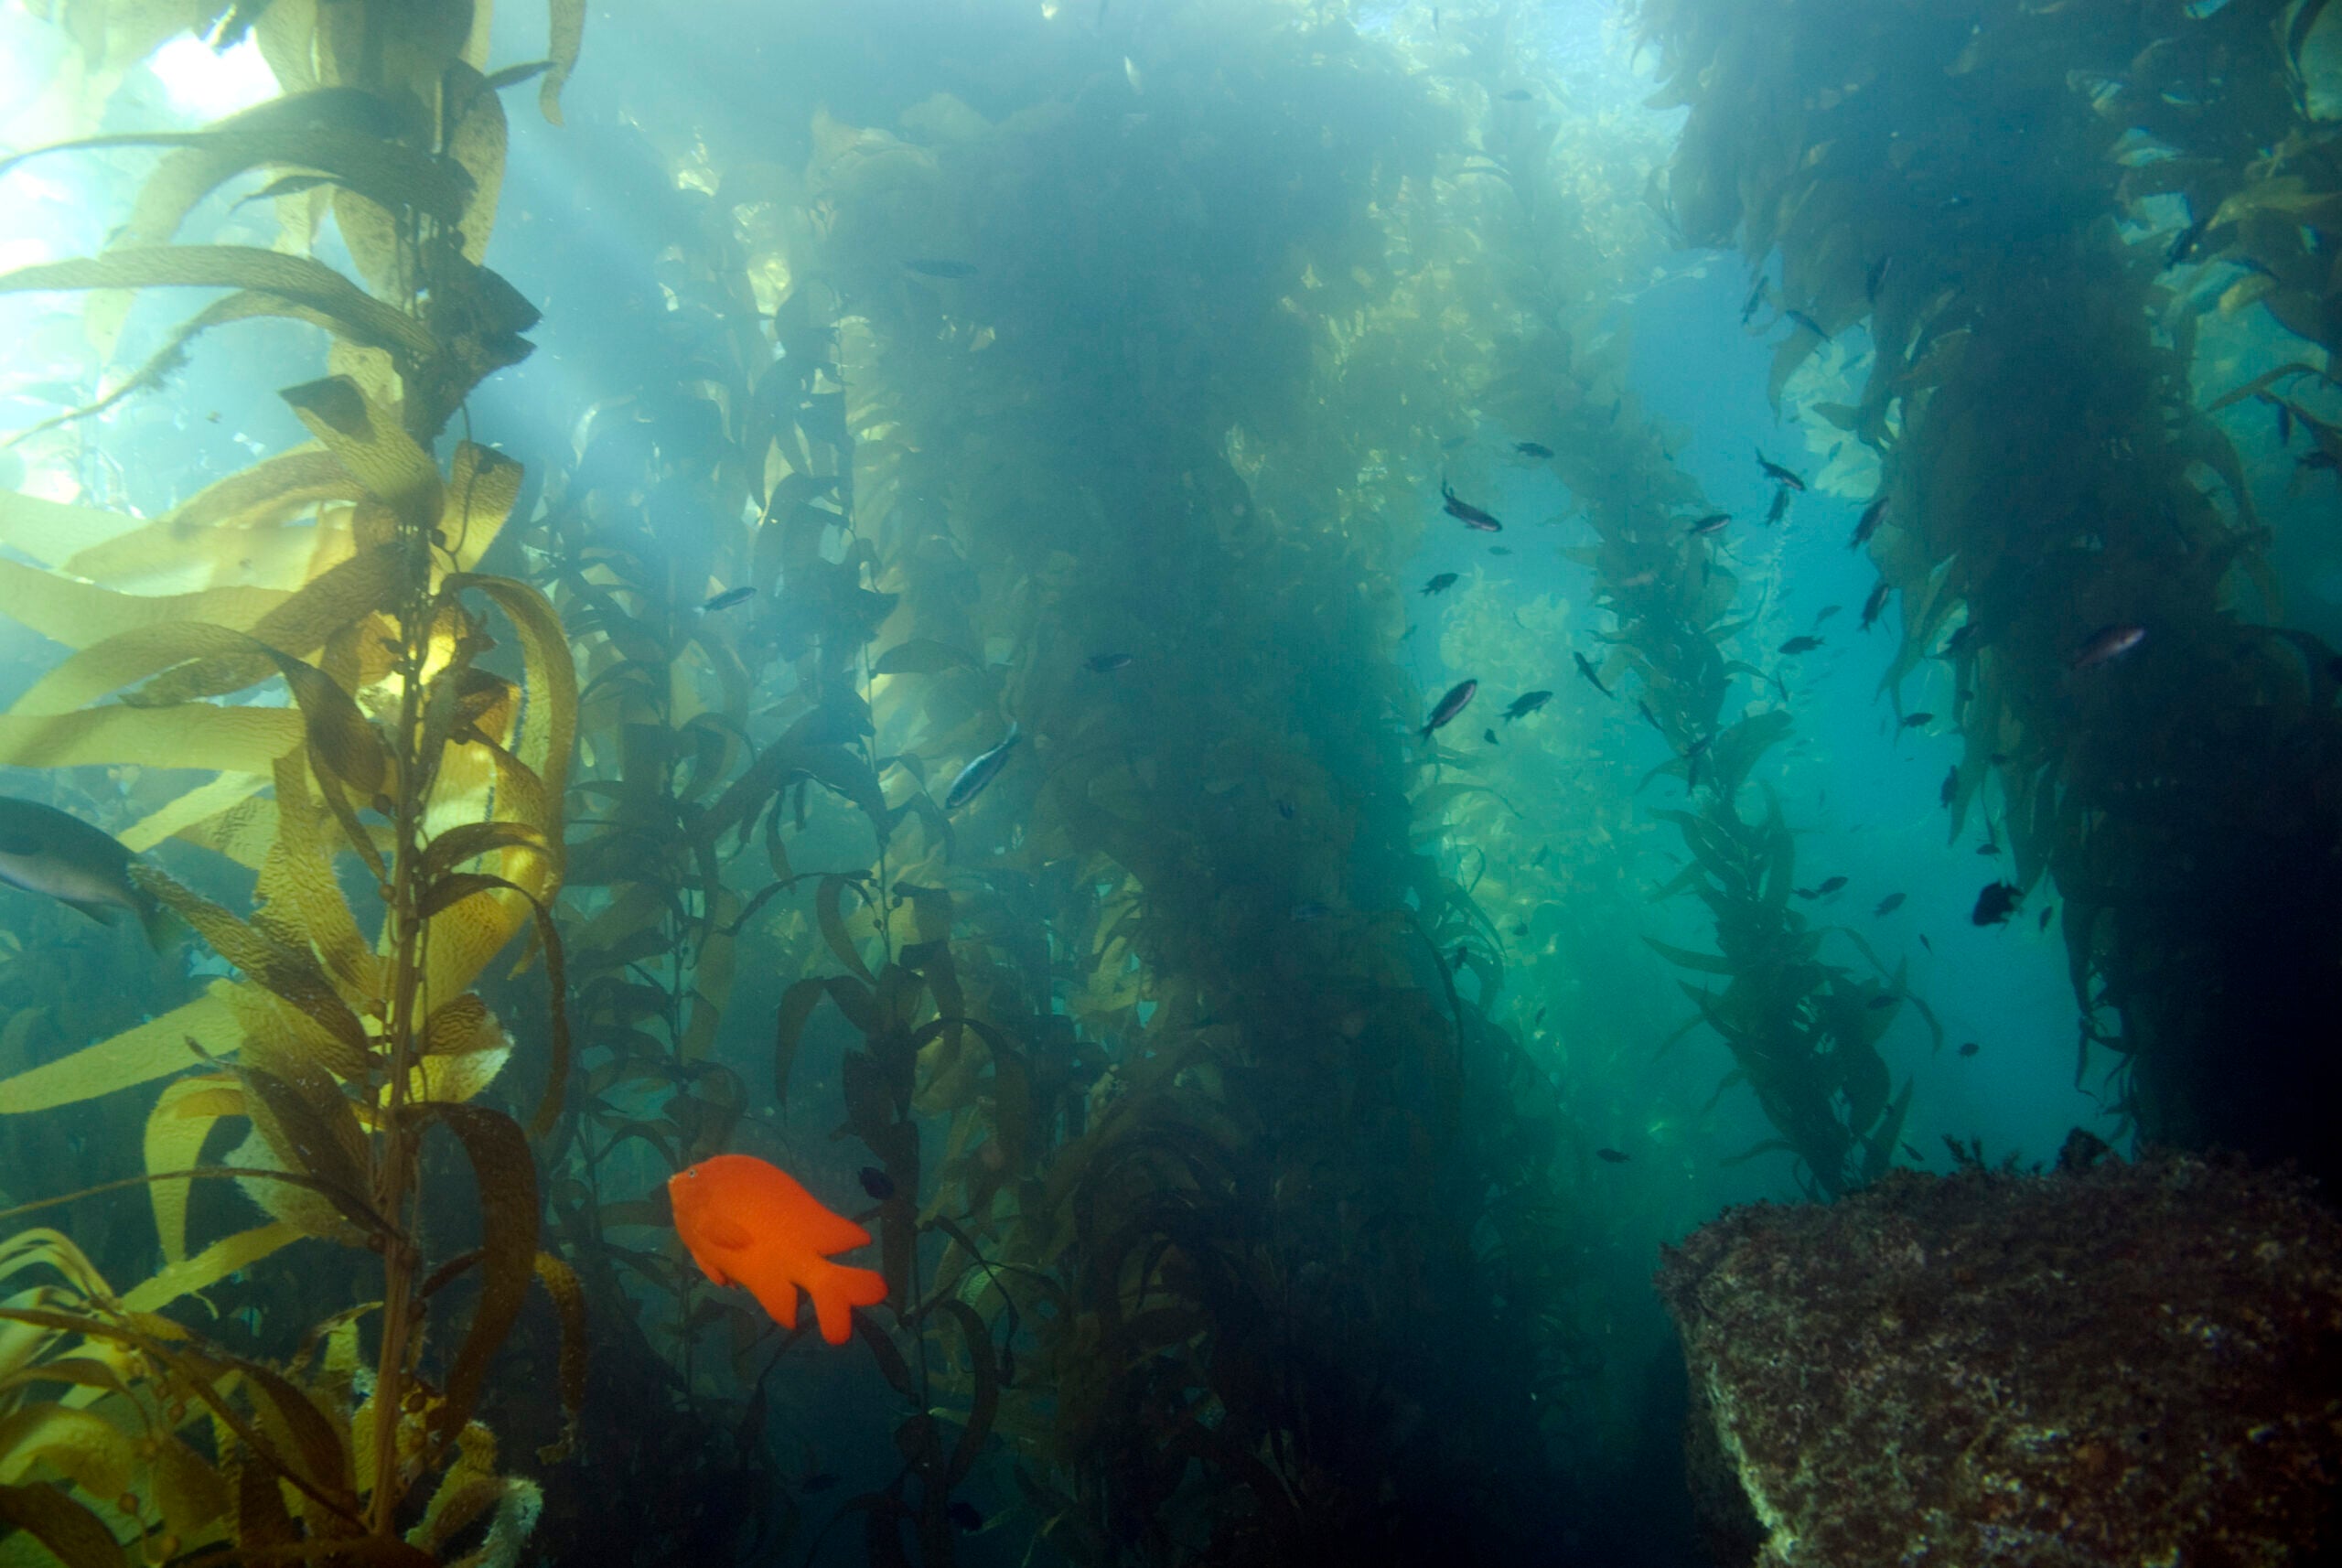 Kelp forest with orange fish to show ocean's carbon storage potential against climate change